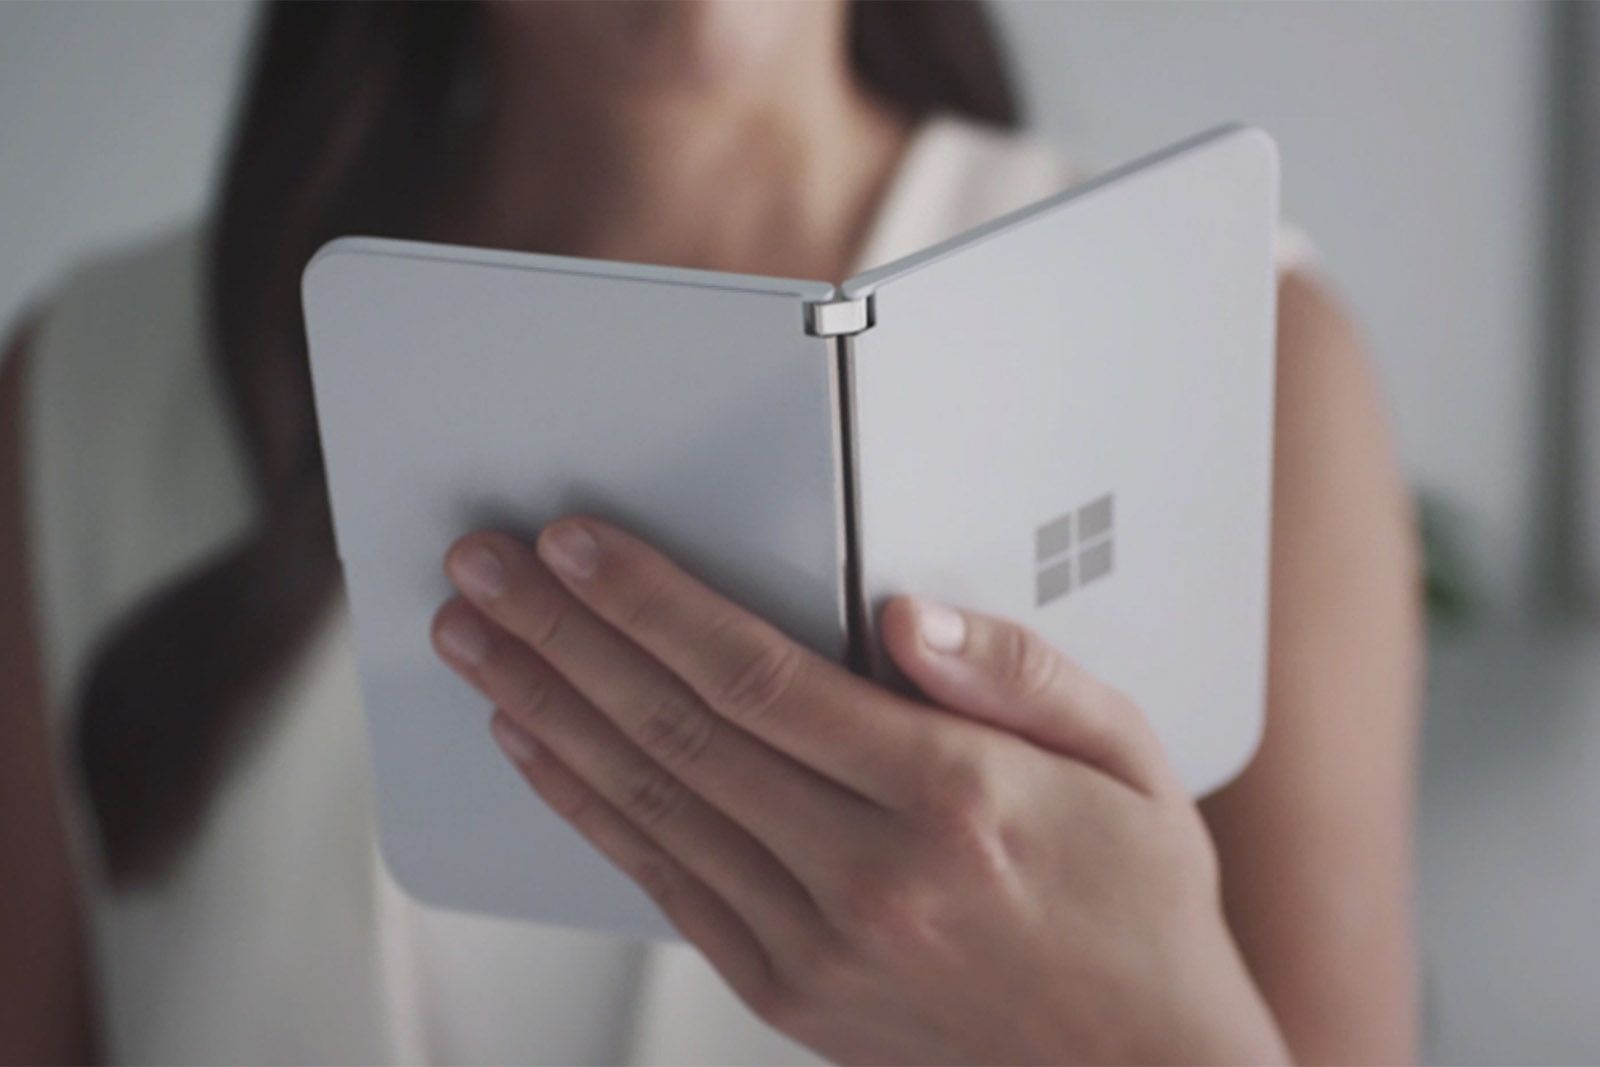 Microsoft is announcing new Surface products on 22 September photo 1